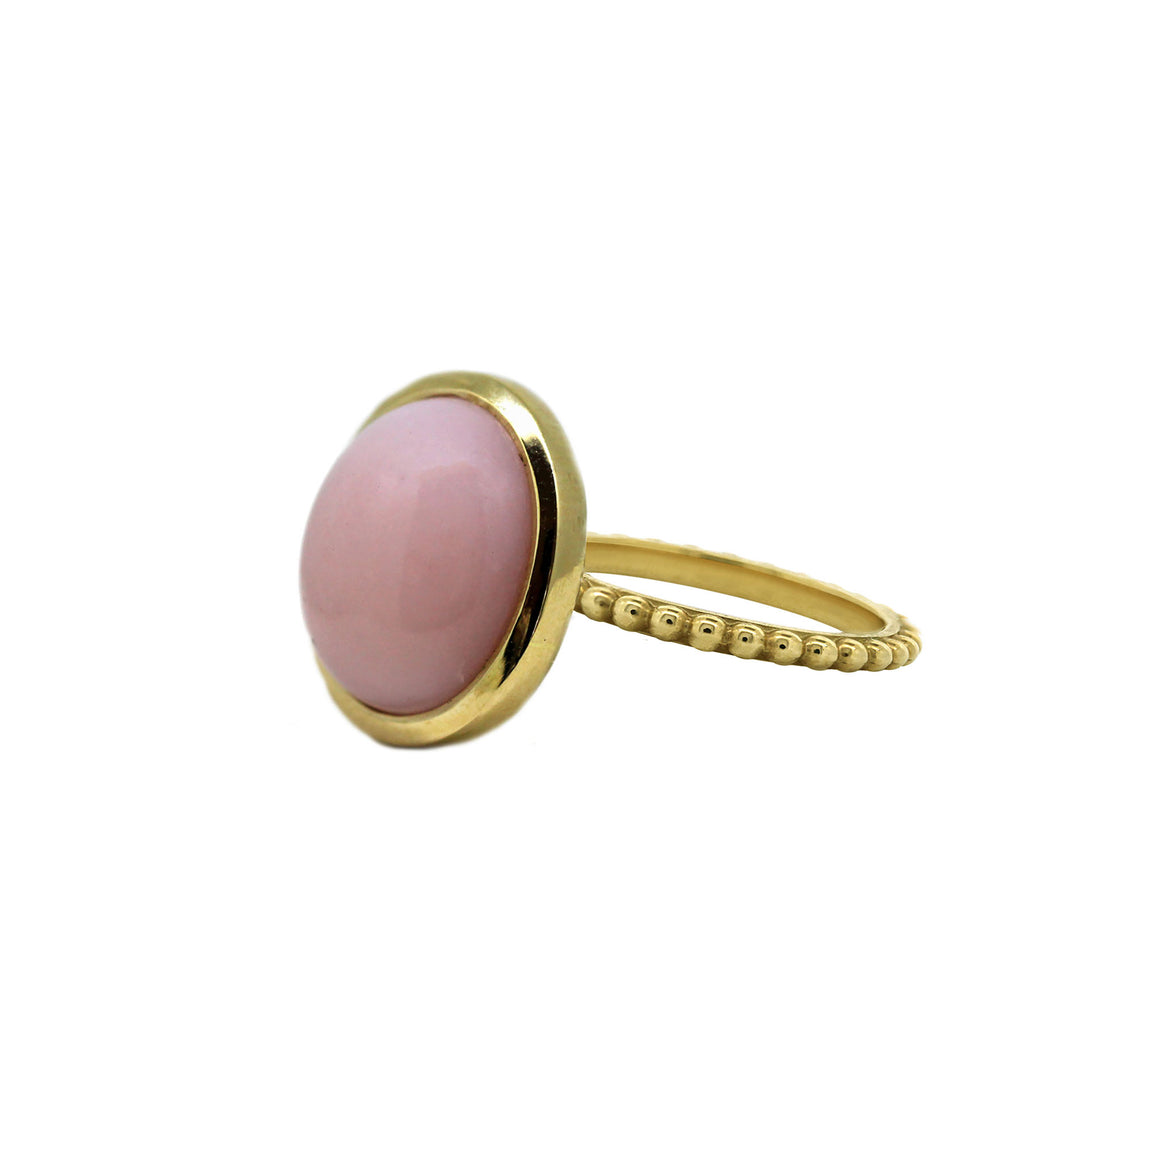 Pink opal oval cabochon ring in yellow gold